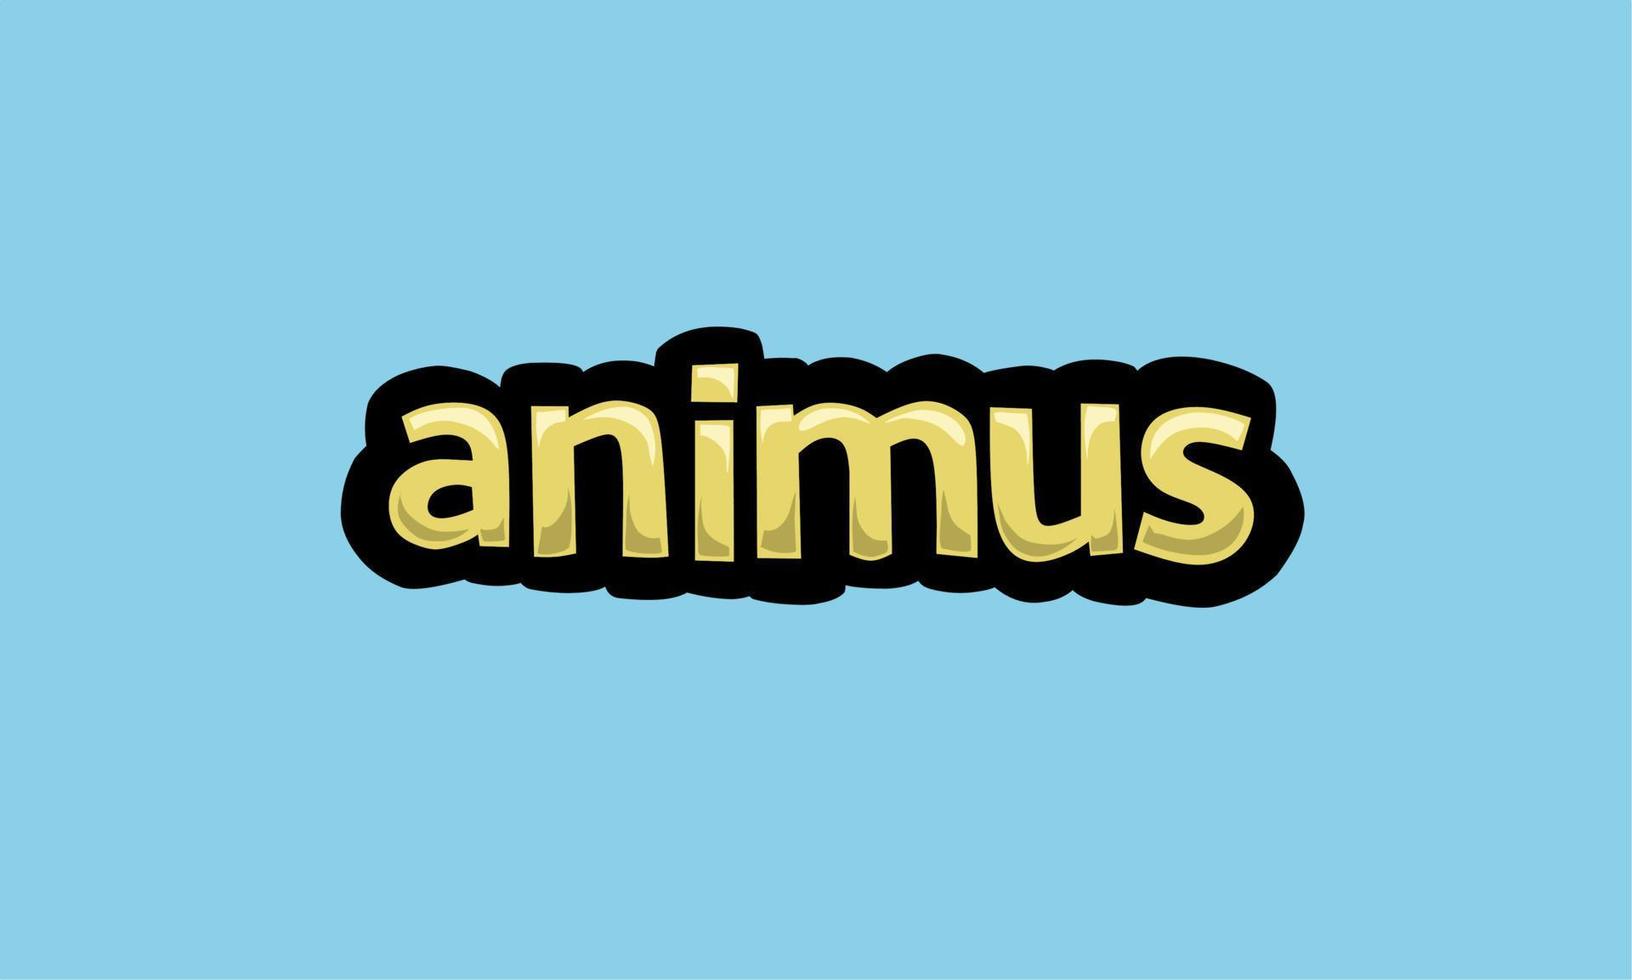 ANIMUS writing vector design on a blue background